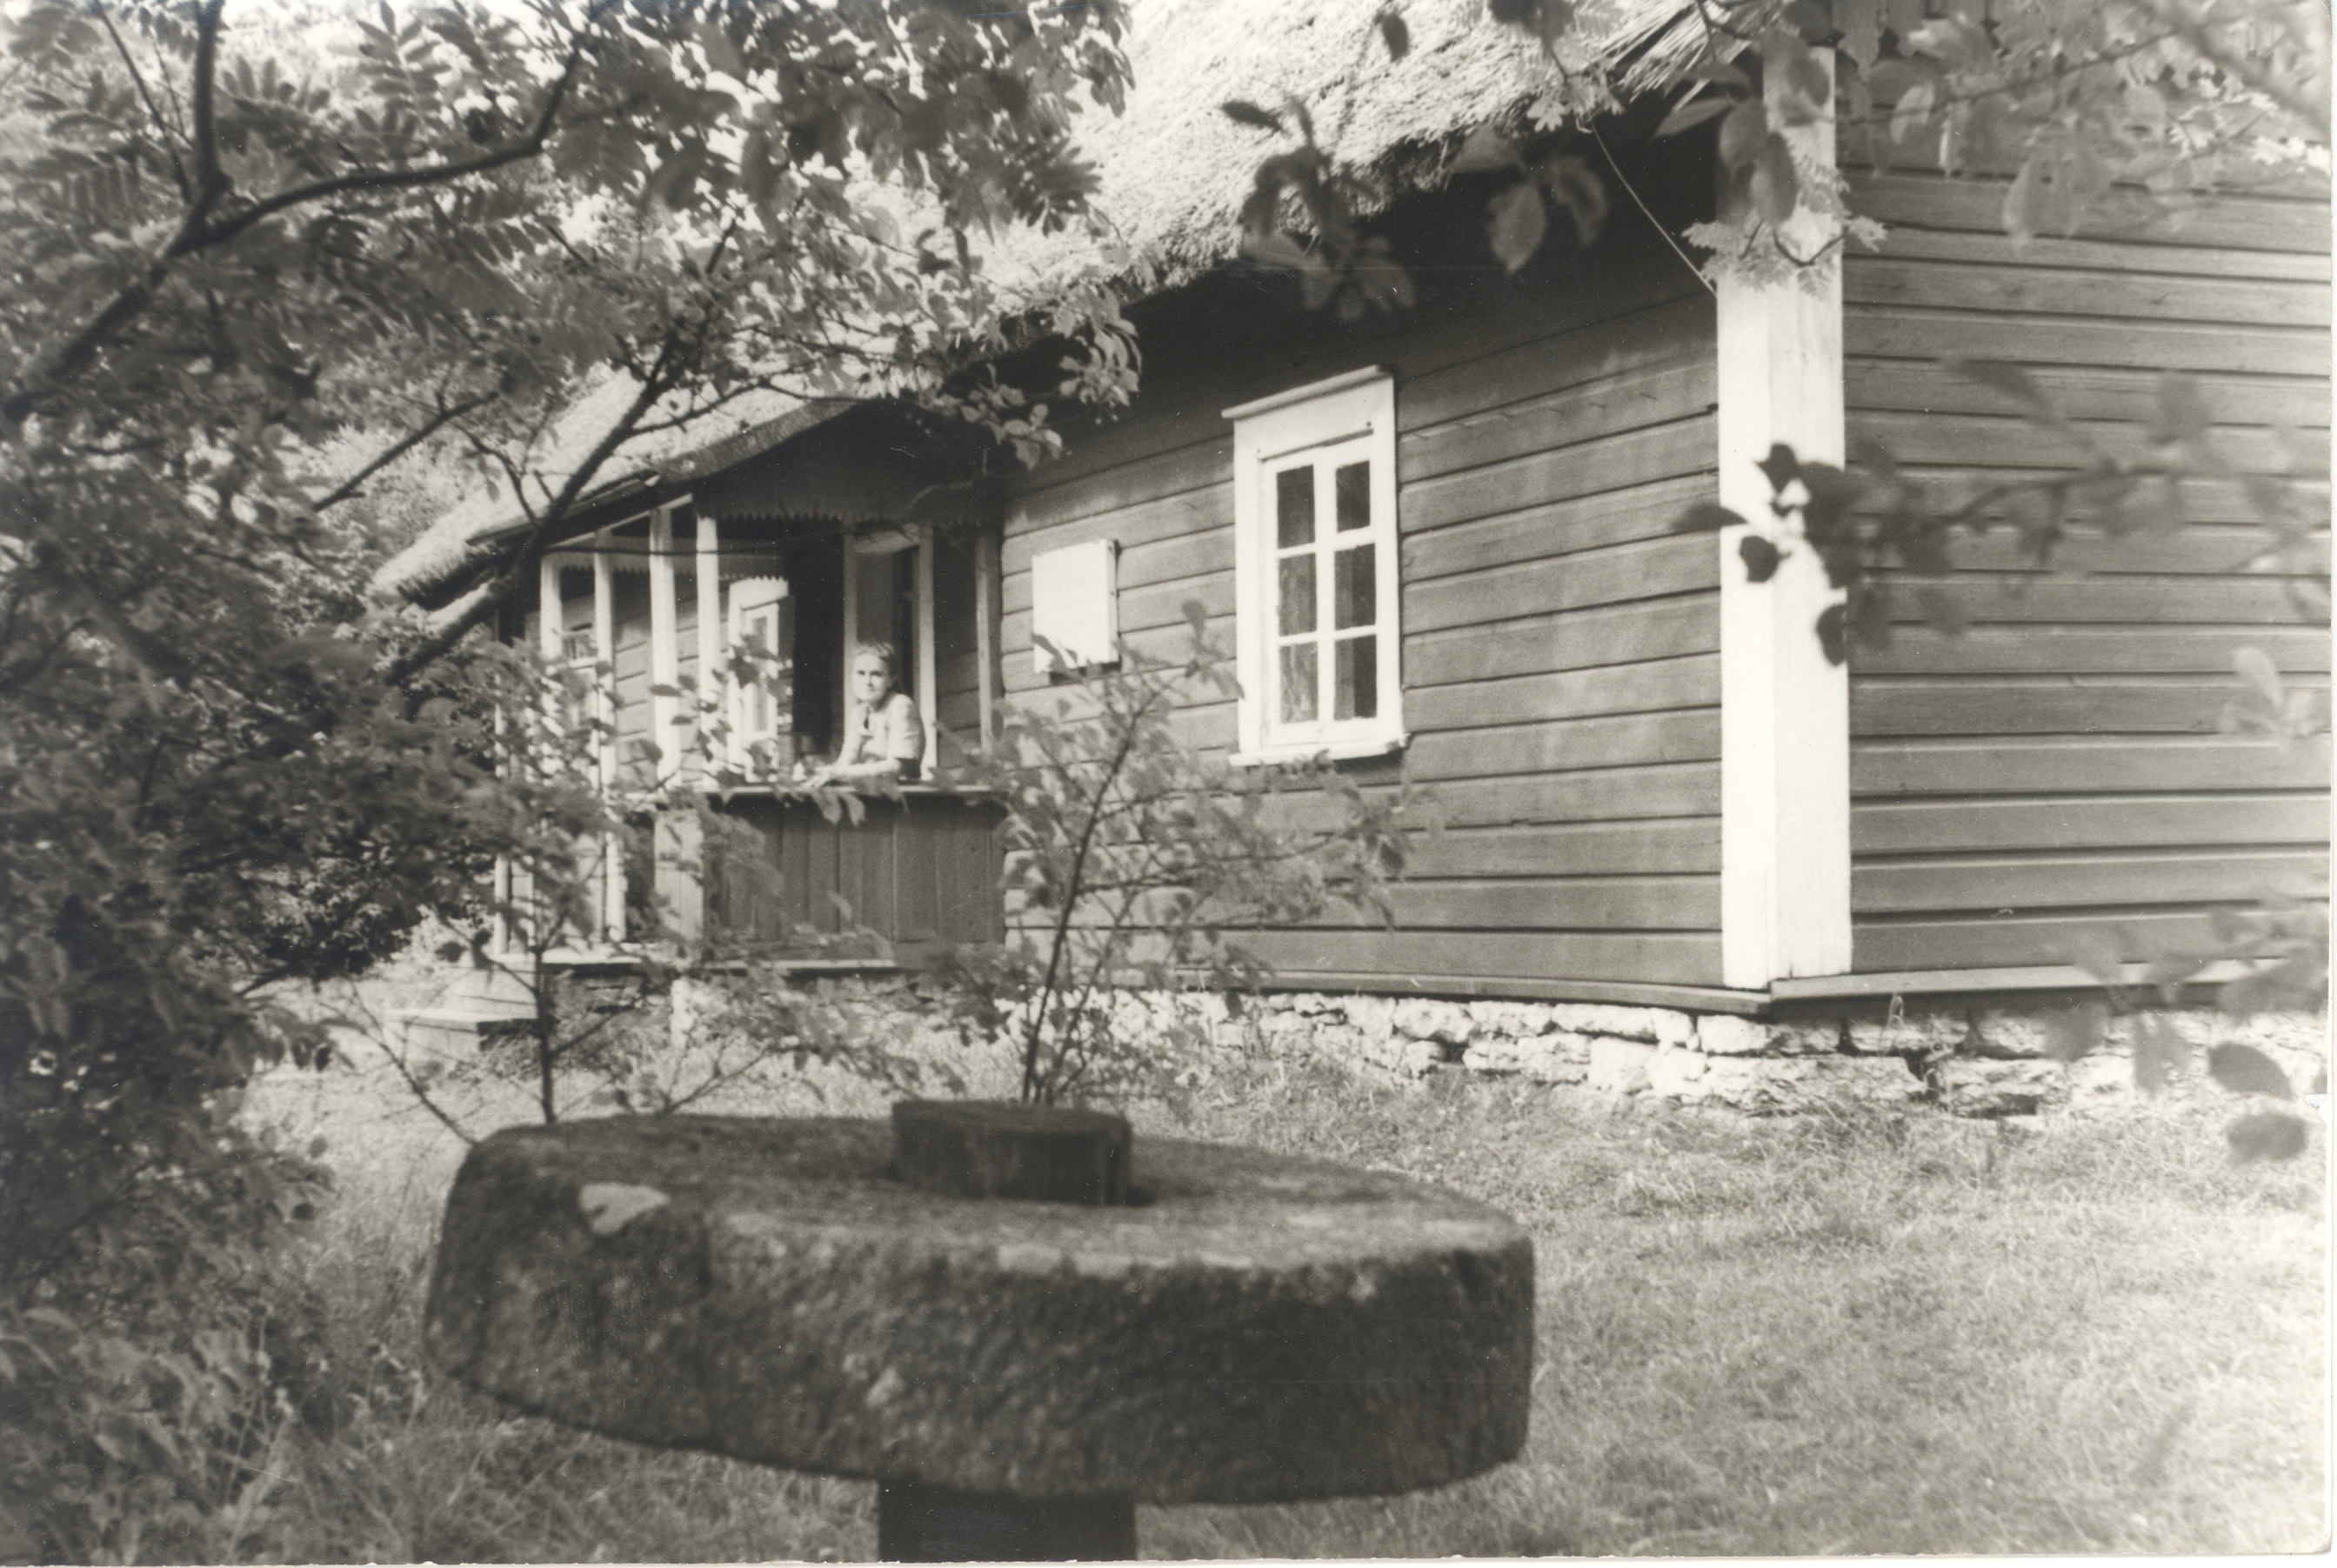 Aino Kalda Summer House in Kassare, where the writer lived in 1924-1938